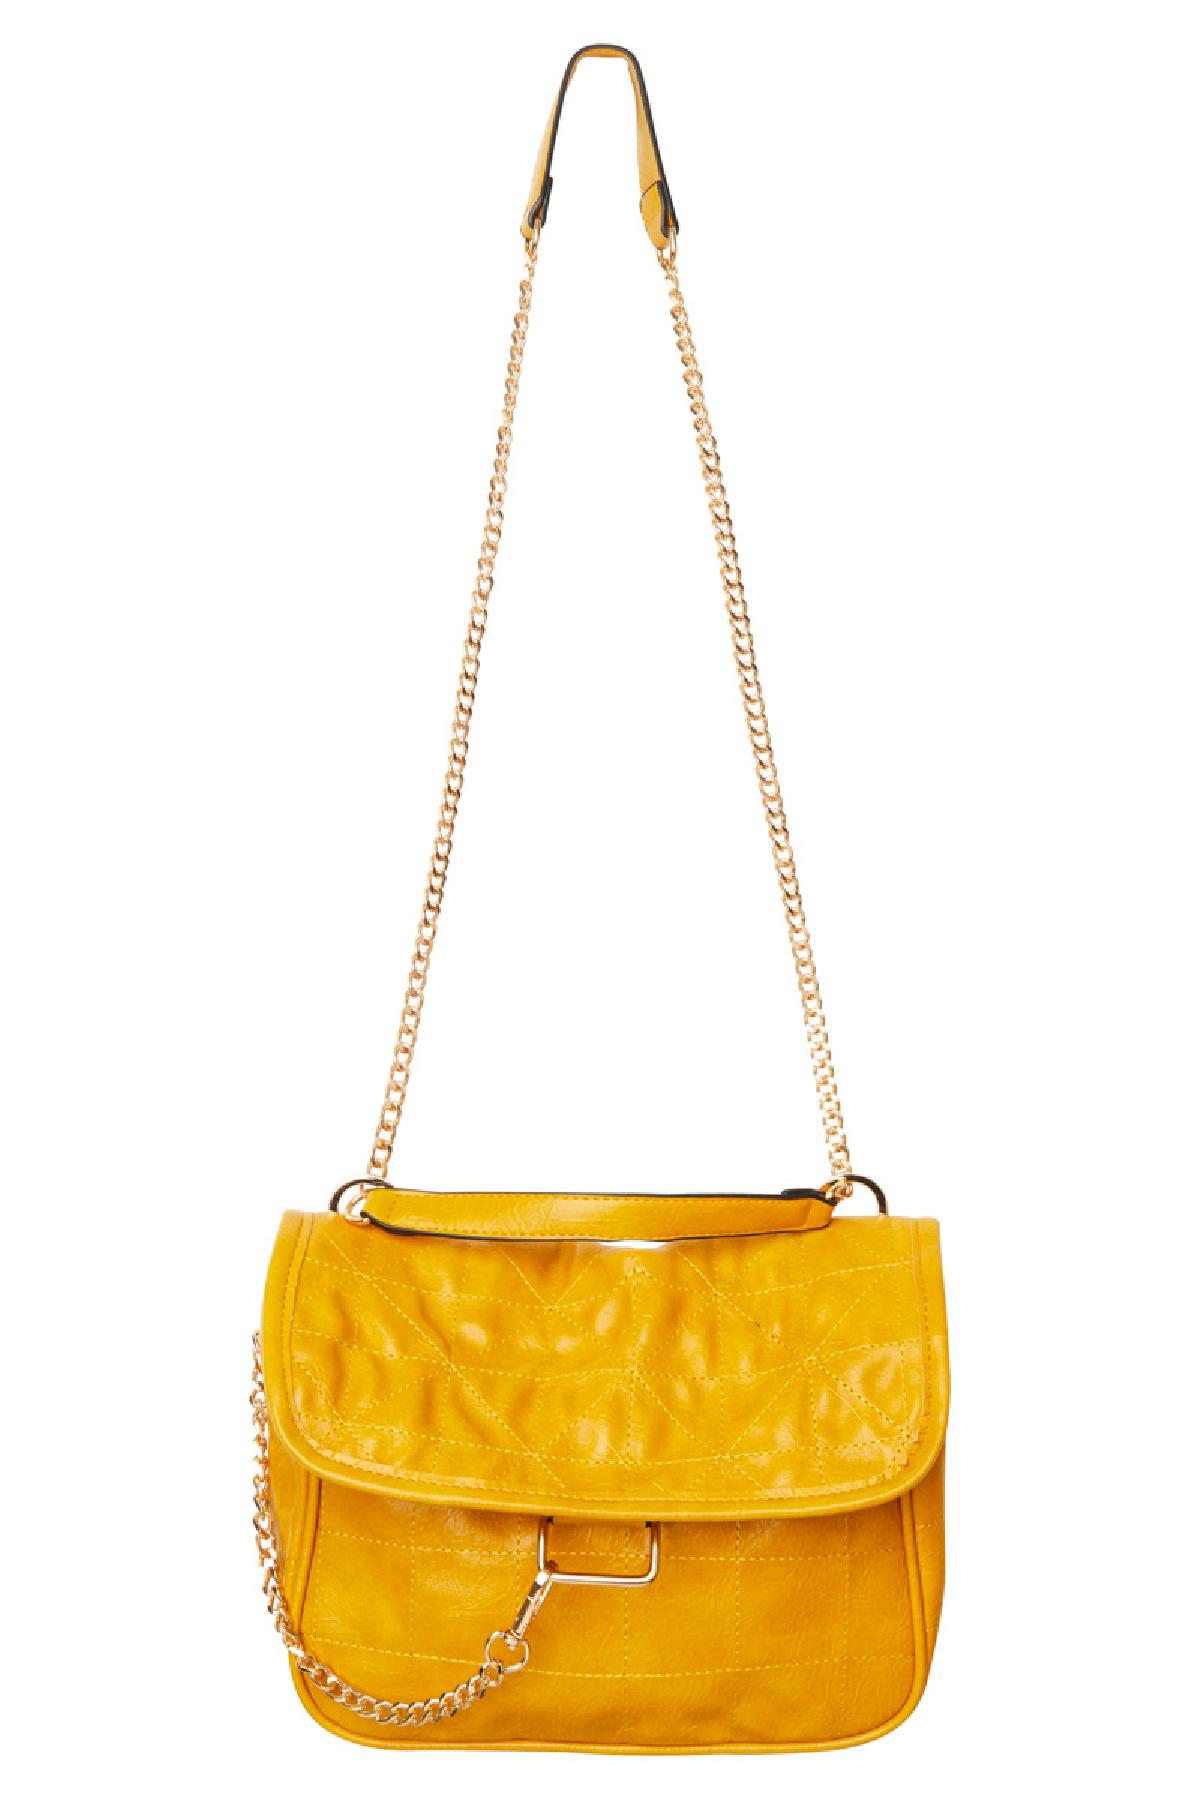 Bag City Life Yellow PU Picture2